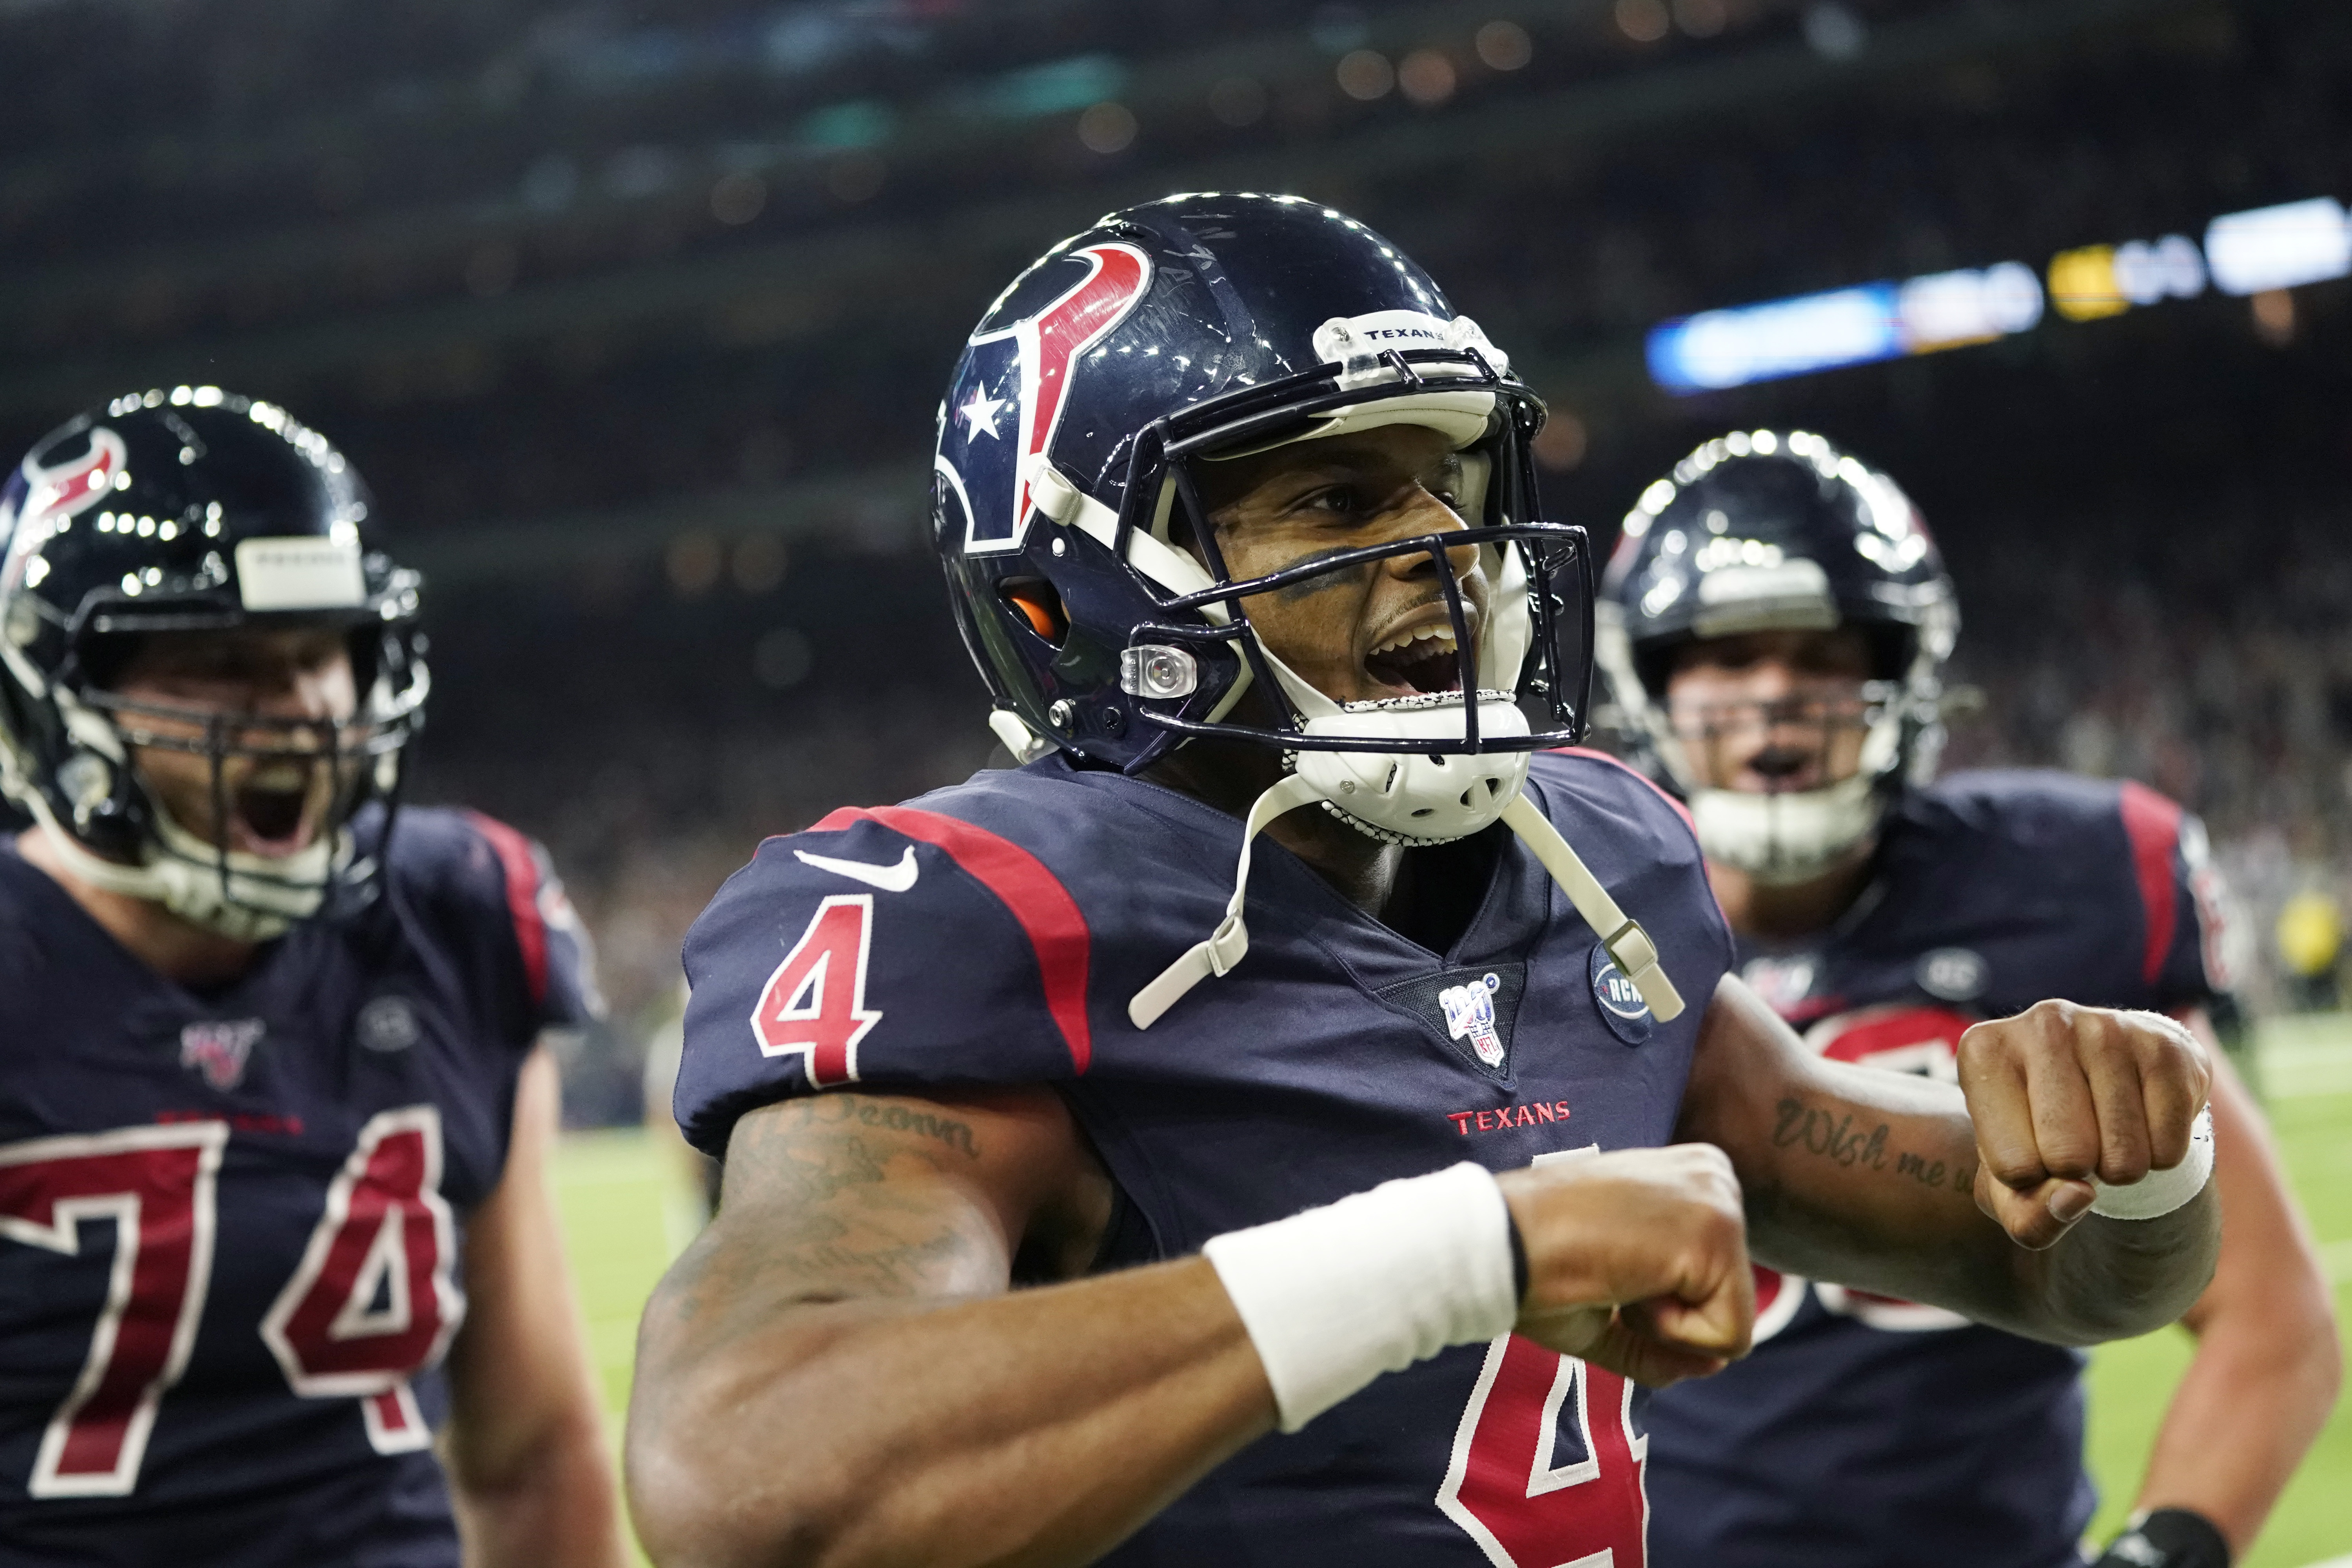 Watson shines, Texans look to build on win over Pats